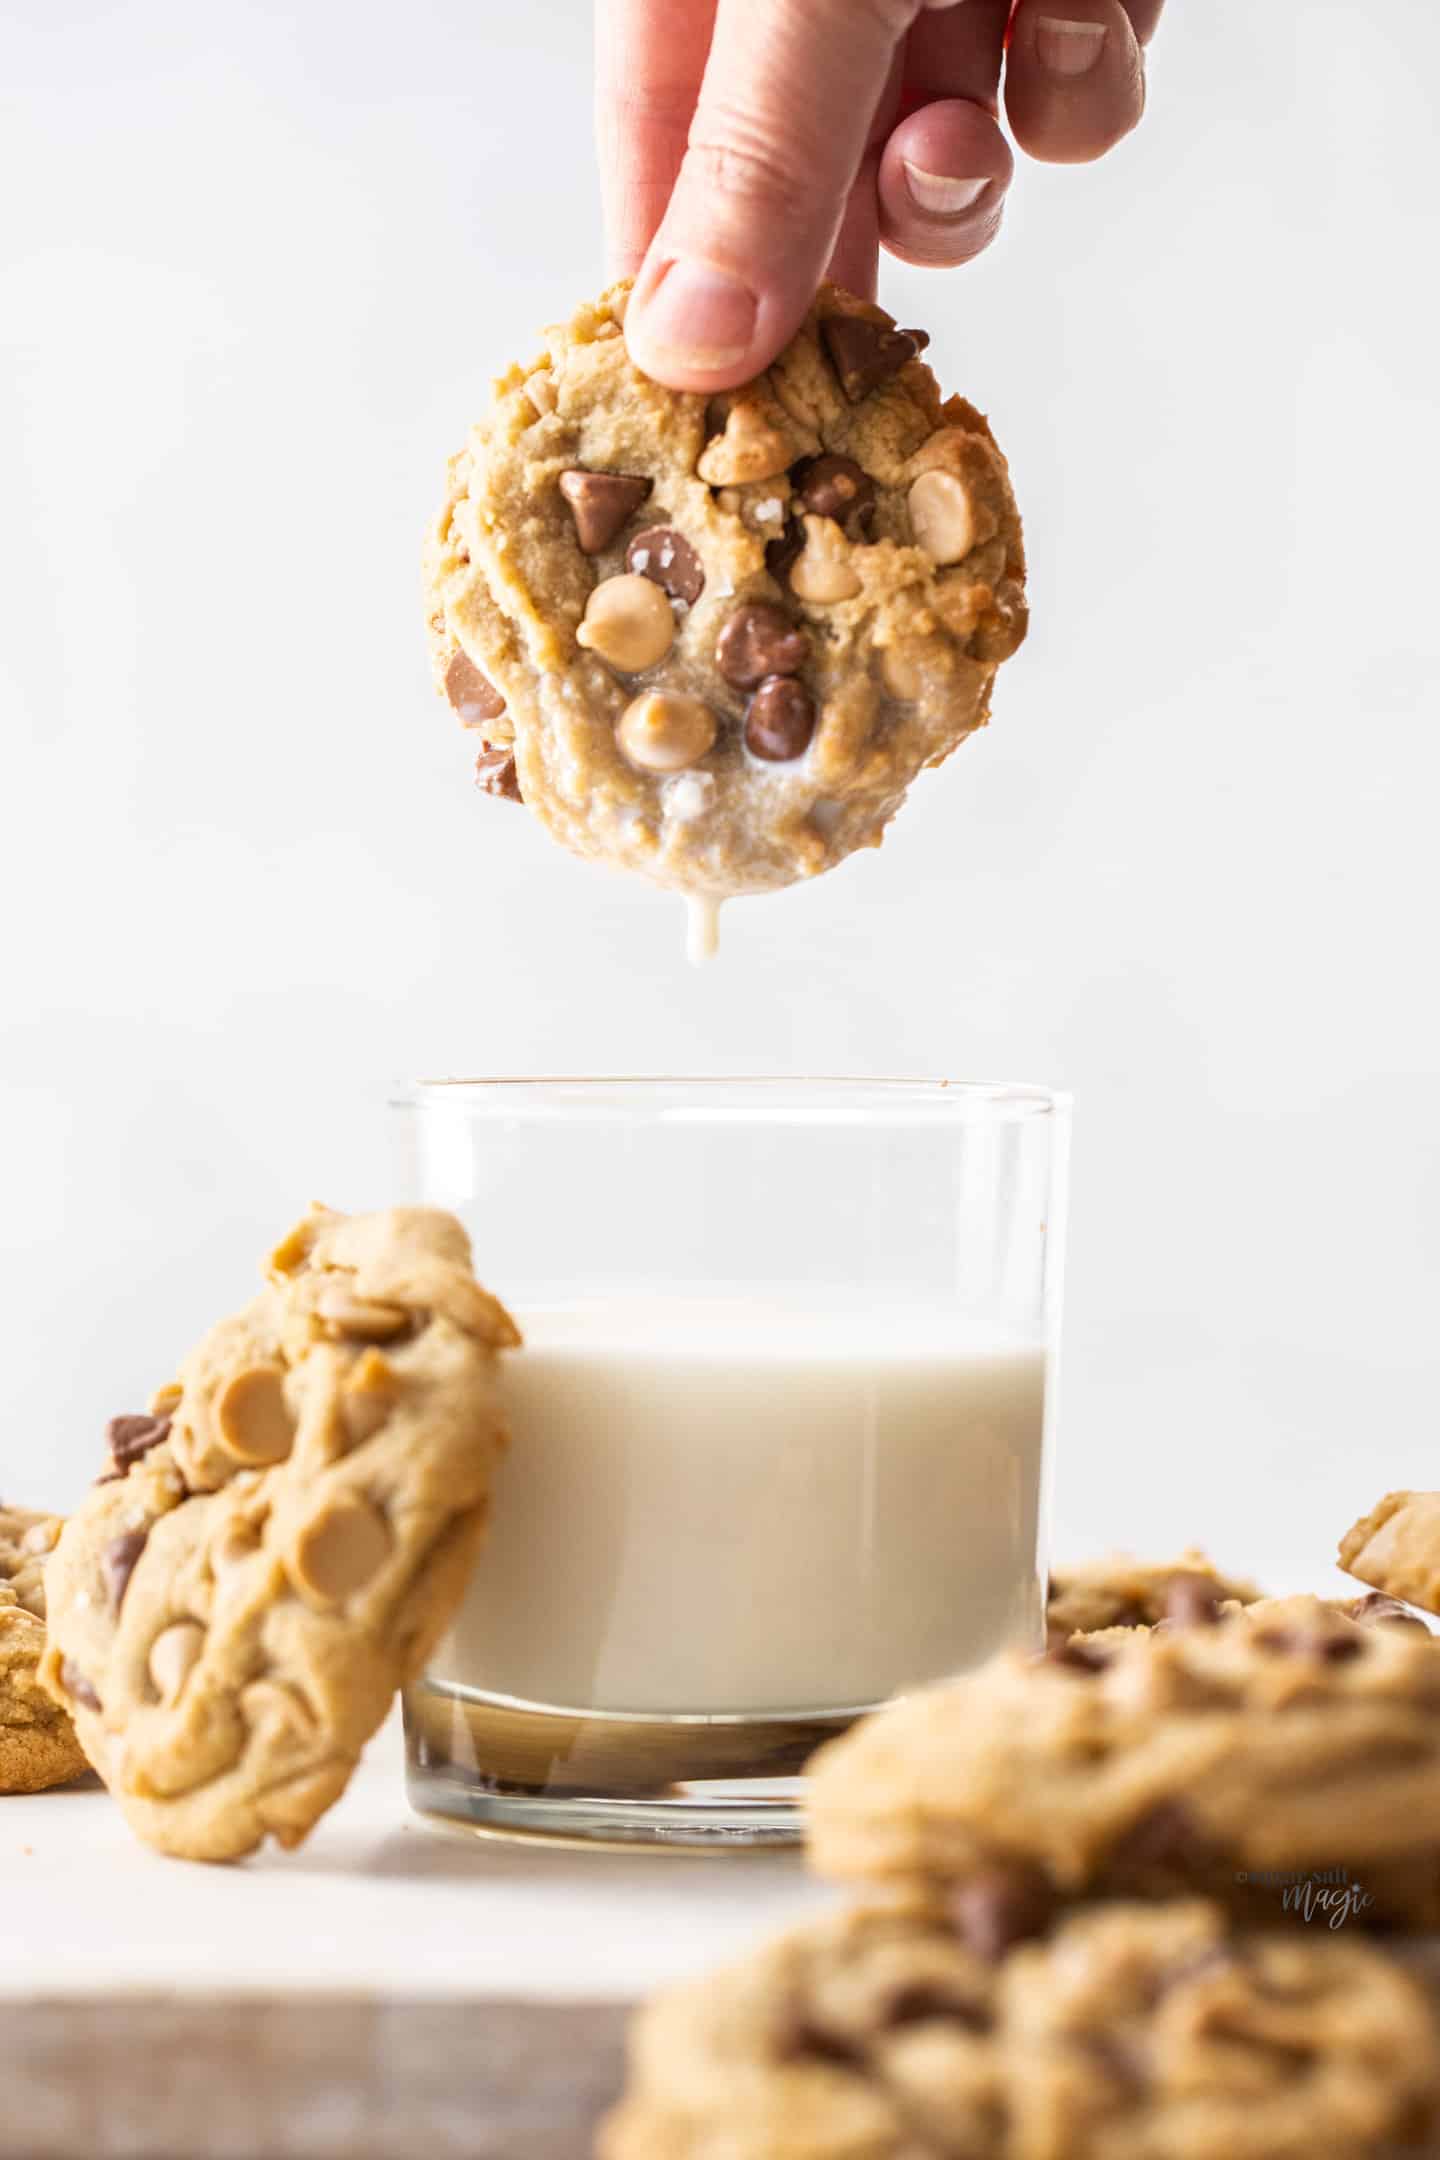 A caramilk cookie being dunked into a glass of milk.